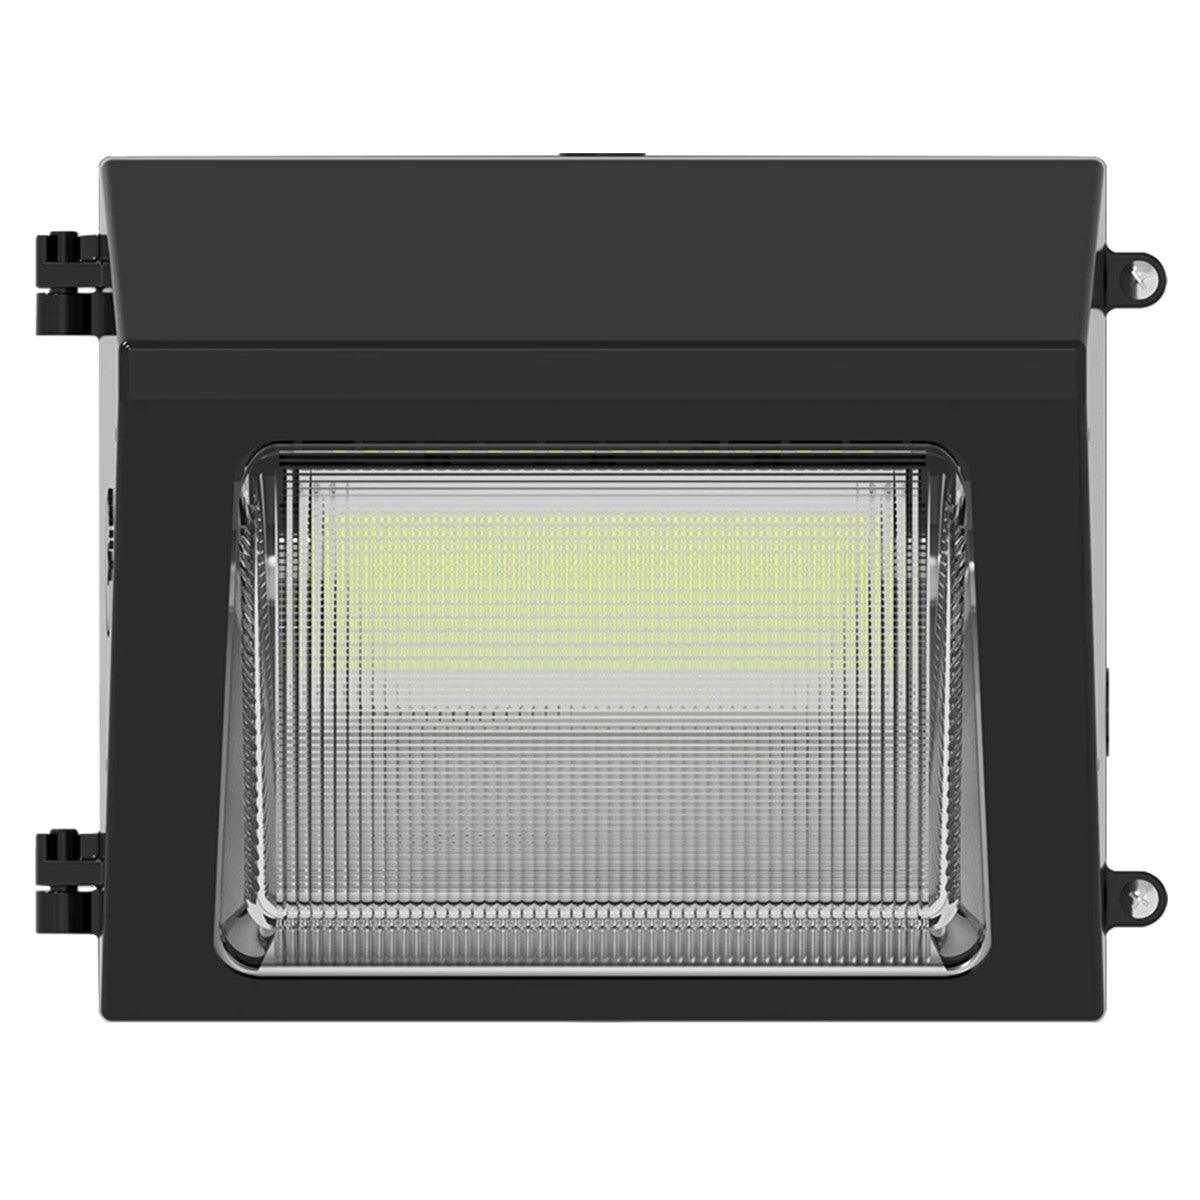 LED Standard Wall Pack With Photocell, 4500 Lumens, 15-30 Adjustable Wattage, Selectable CCT 30K/40K/50K, 120/277V, Adjustable Throw - Bees Lighting